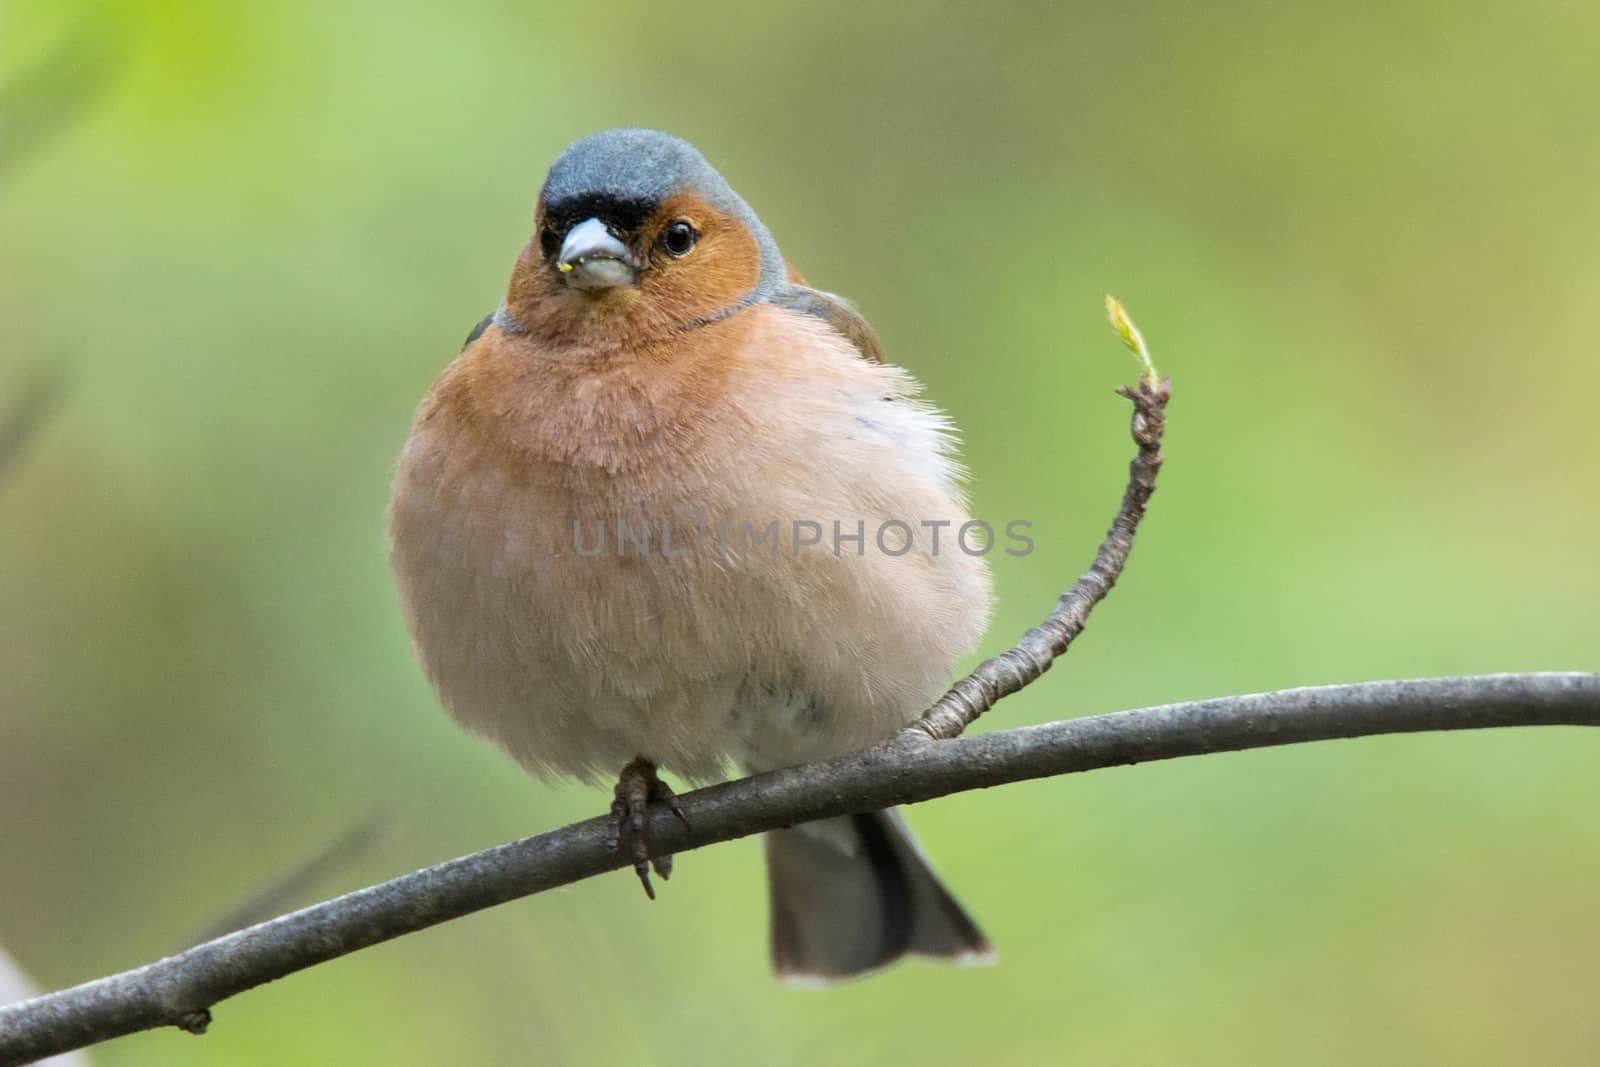 The picture shows a chaffinch on a branch